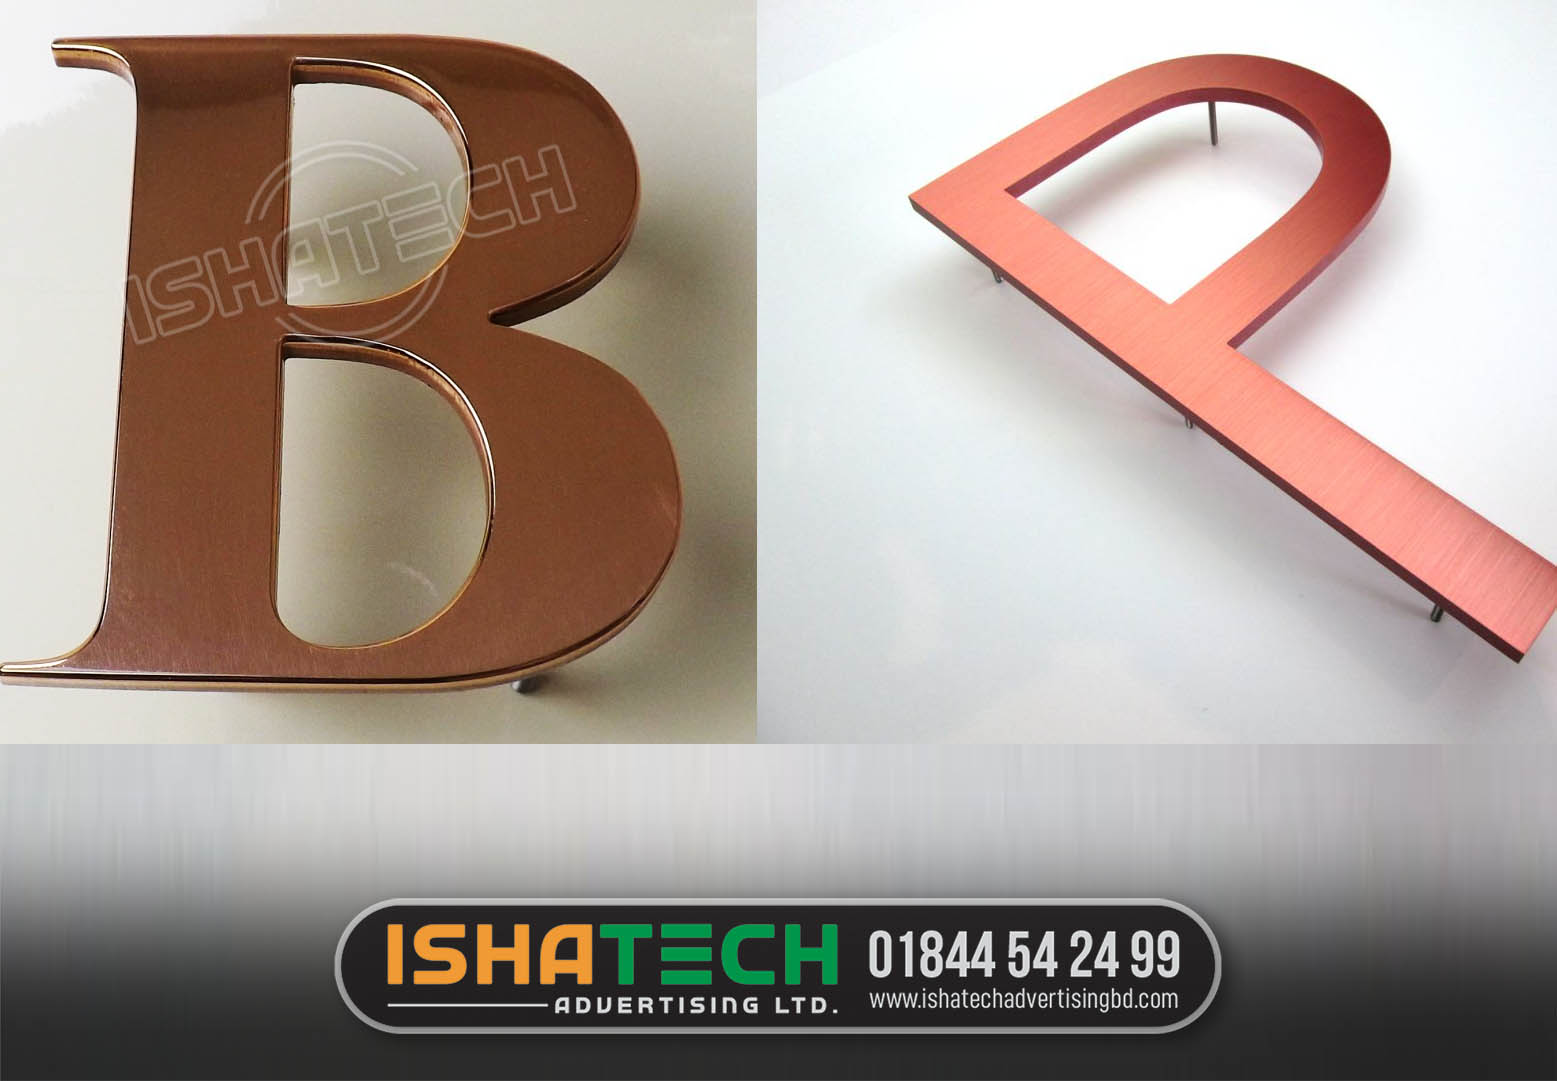 Ishatech Advertising Ltd is a manufacturer all kinds of letter signage acrylic SS Golden Copper Letter Signage, Bangladesh Mirror Metal Copper SS Top Letter Signboard for Indoor and Outdoor. SS Sign Board SS Top Letter Acrylic Top Letter SS Metal.